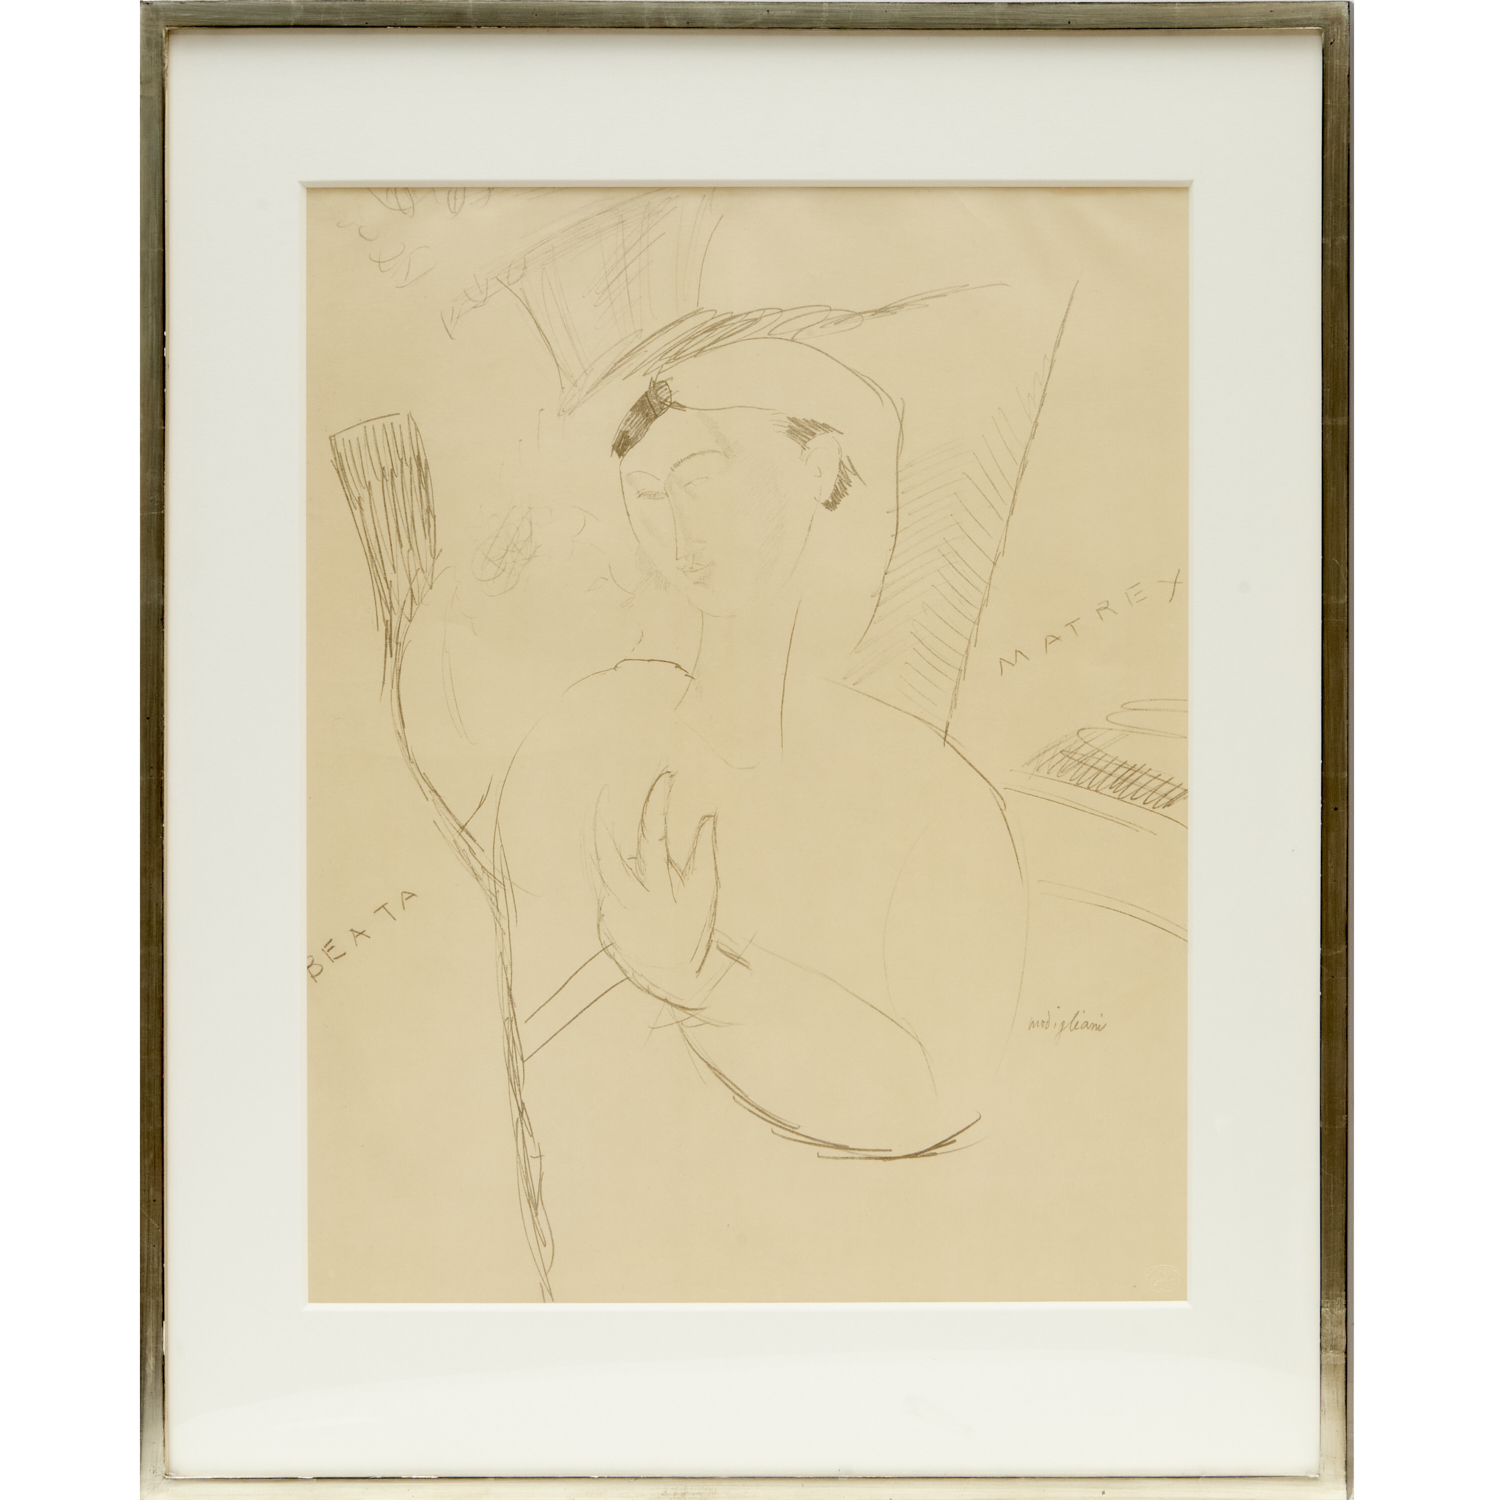 AFTER AMEDEO MODIGLIANI, LITHOGRAPH